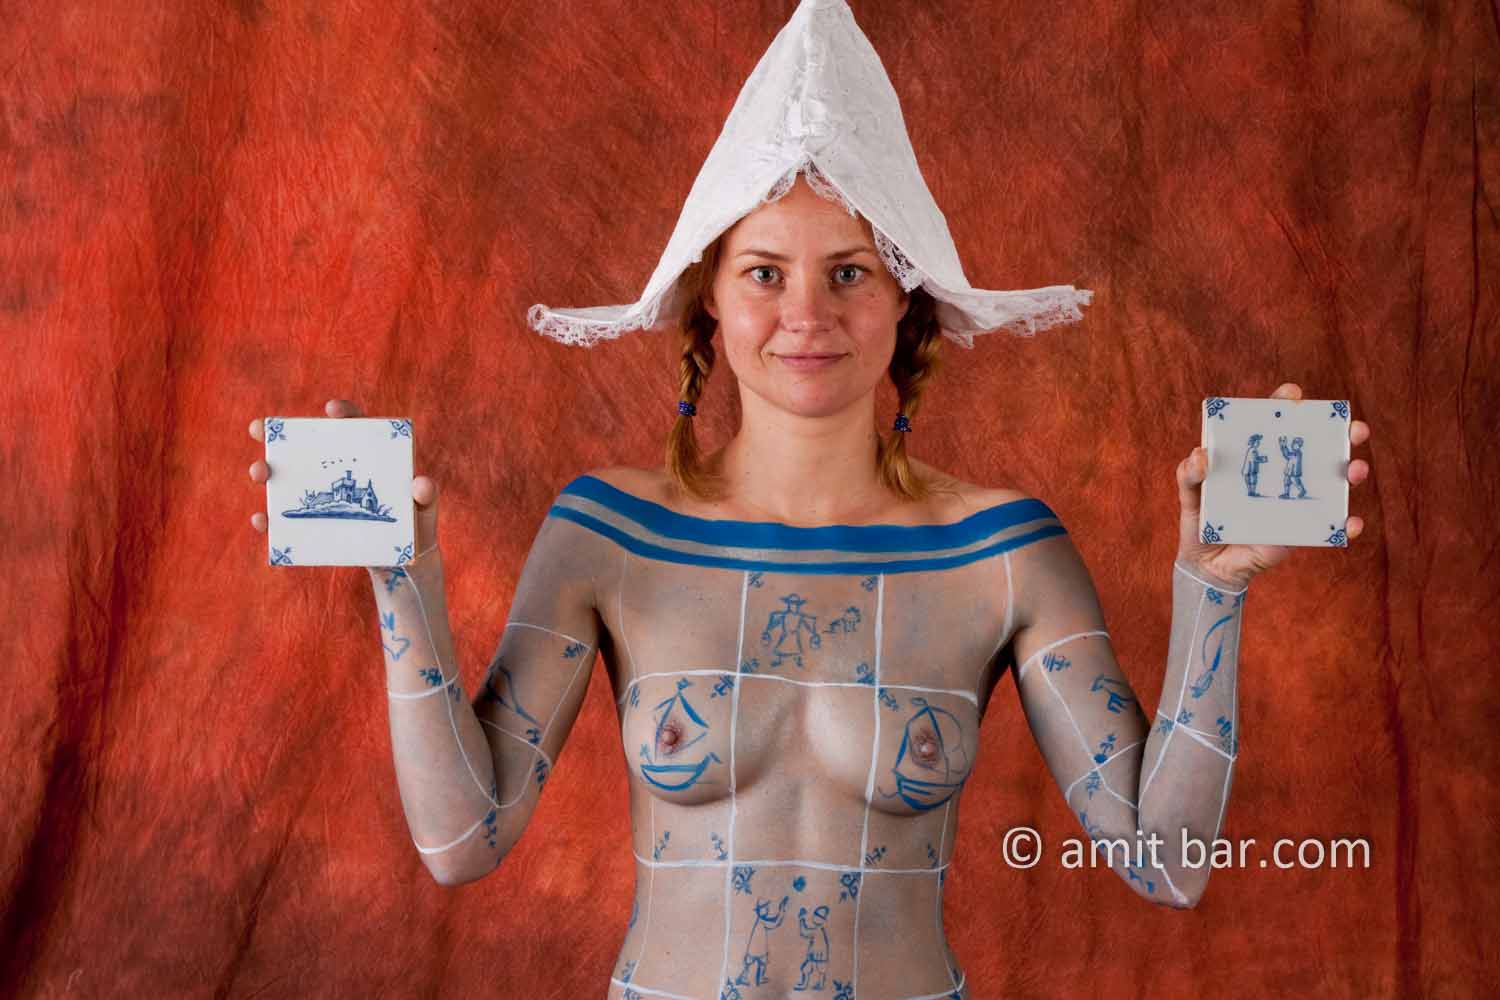 Delft blue I: Body-painted model with Delft blue tiles